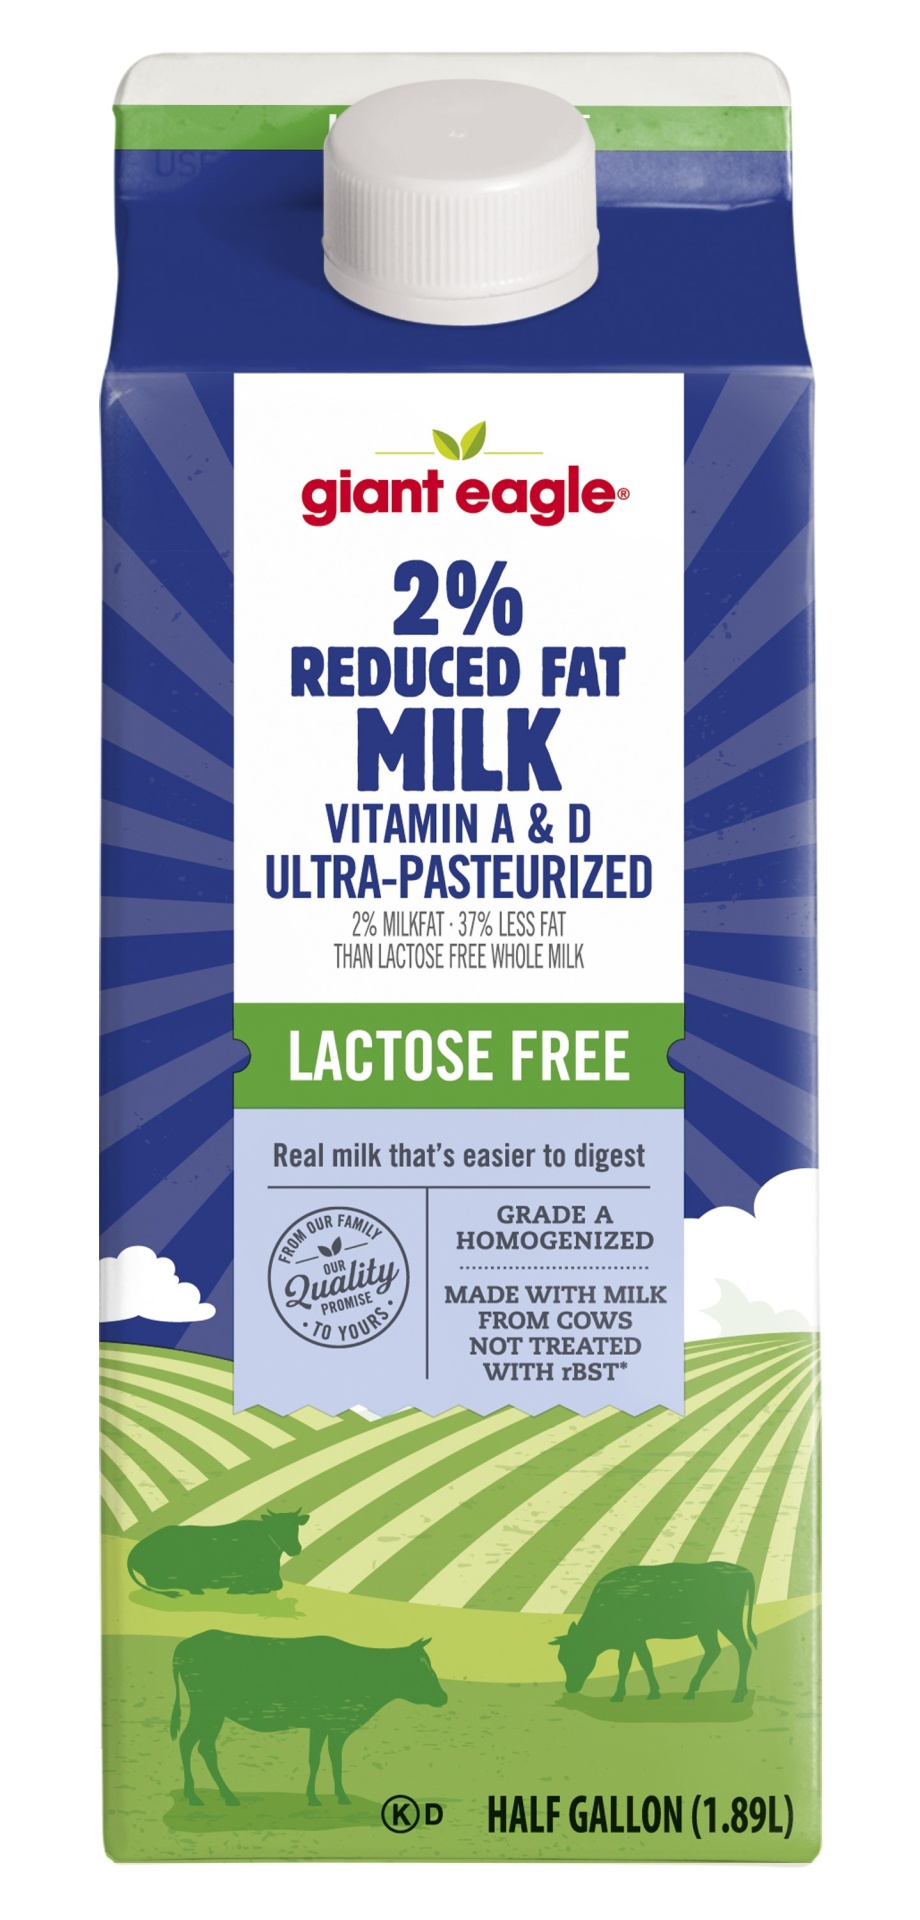 slide 1 of 1, Giant Eagle Milk, 2% Reduced Fat, Vitamin A & D, Lactose Free, 64 oz